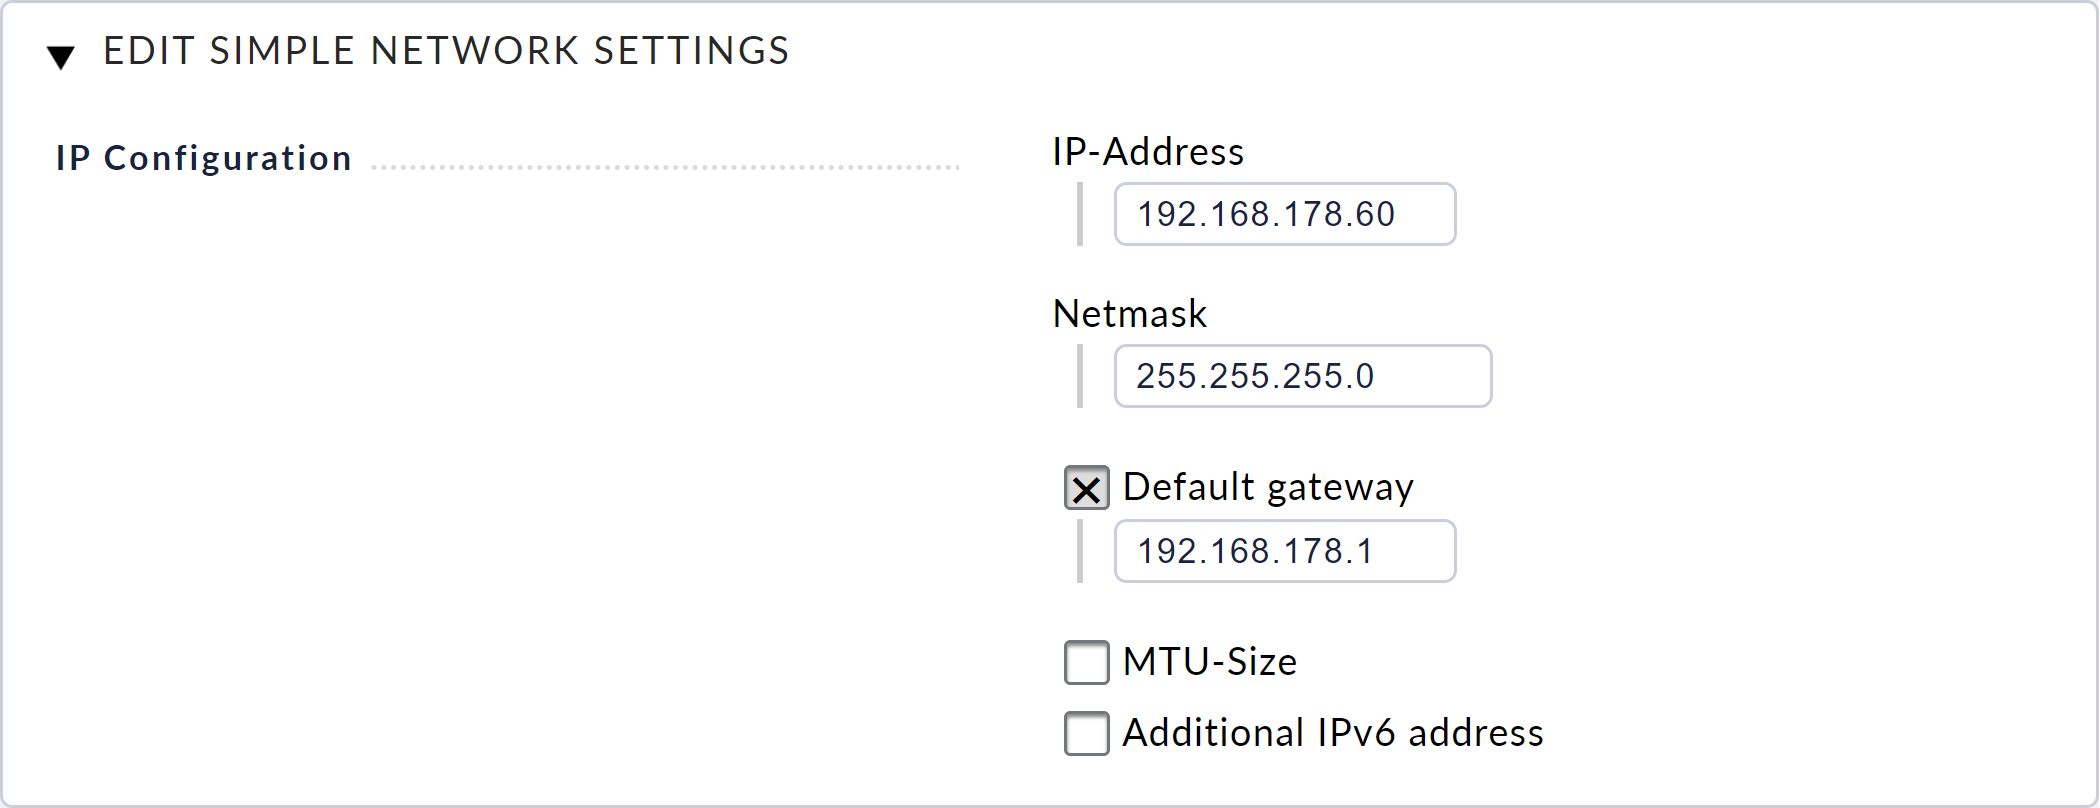 Altering the Simple Network Settings.